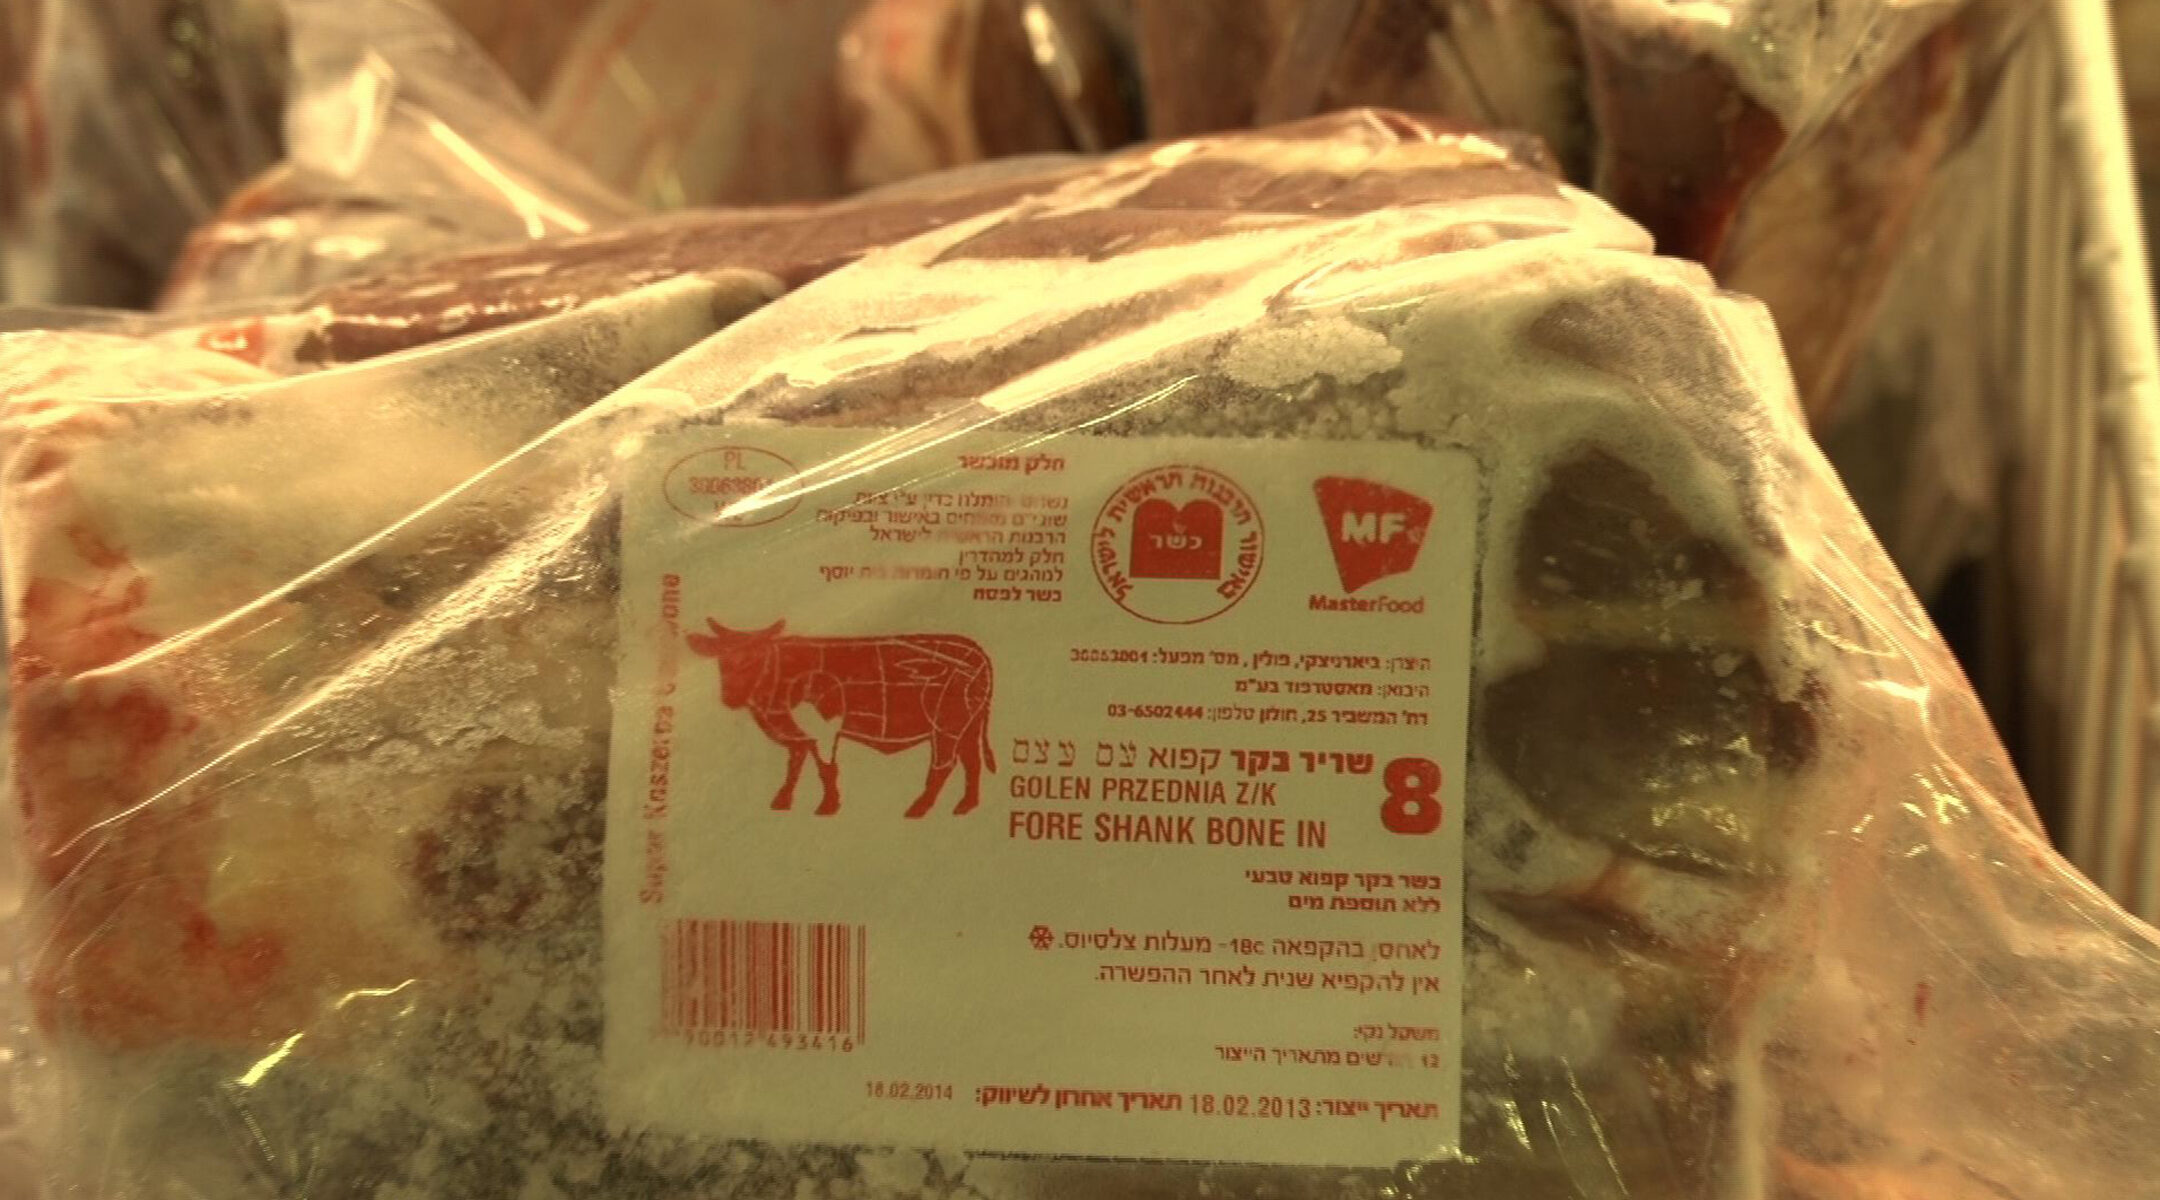 Kosher meat from a cow that was slaughtered in Poland in Nov. 2013 carrying a kosher certification from the Chief Rabbinate of Israel. (Aryeh Gross)